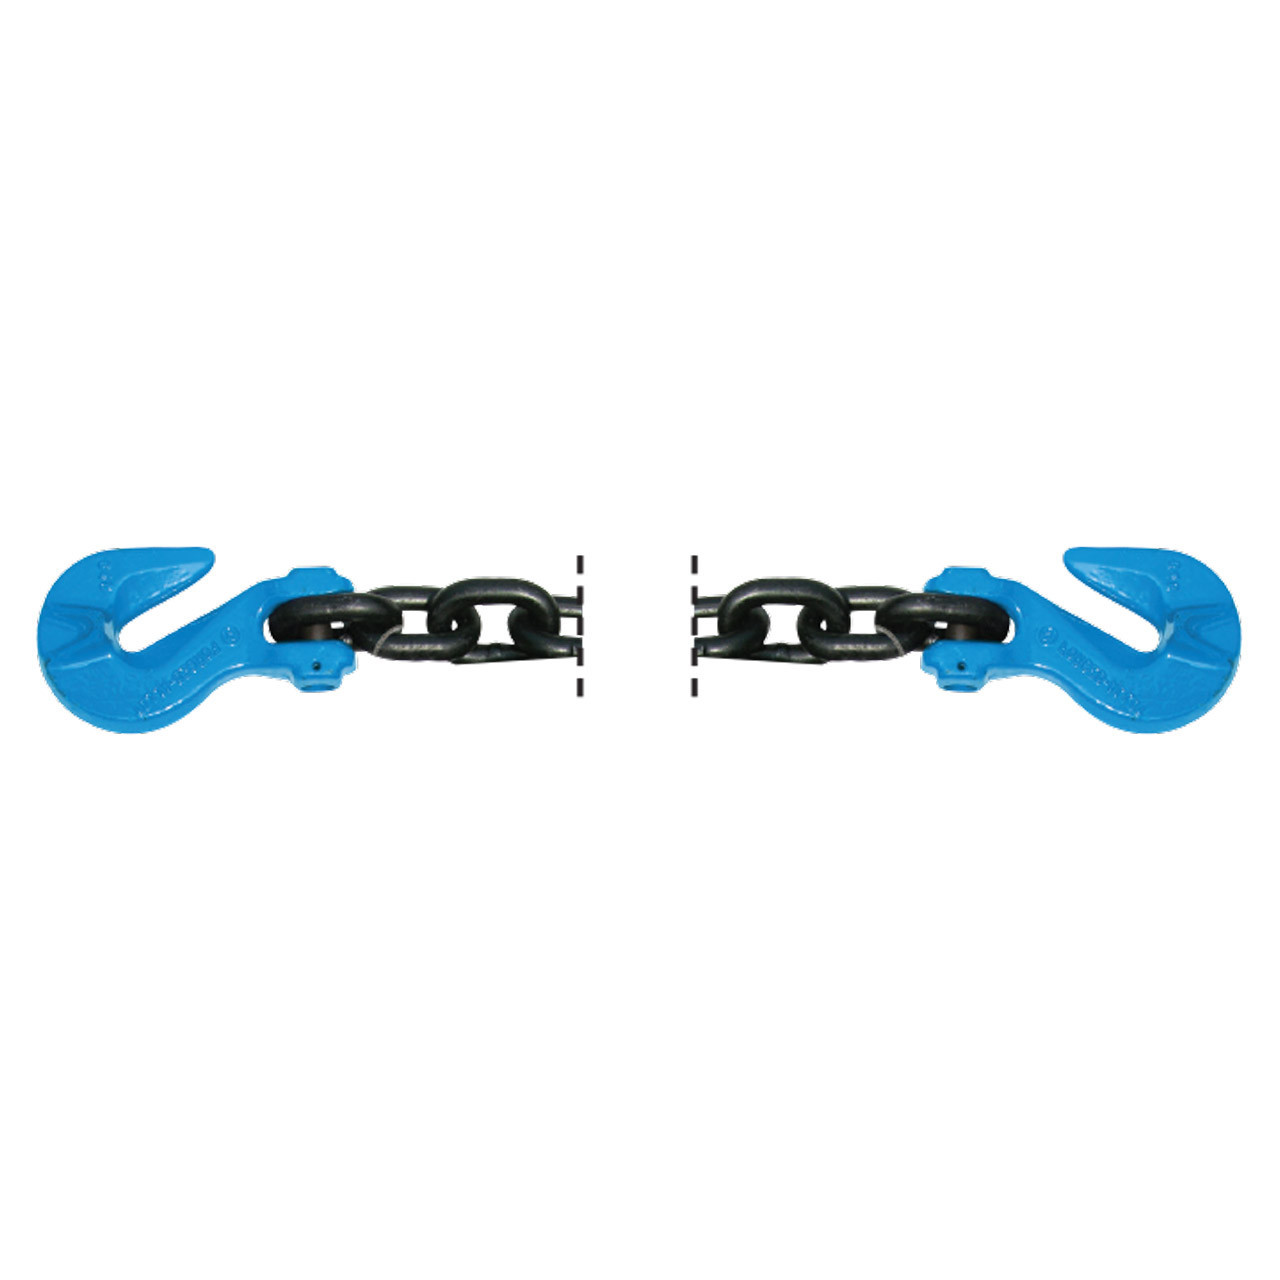 B/A Products Co. 5/16 Grade 100 Cradle Grab Hook Chain